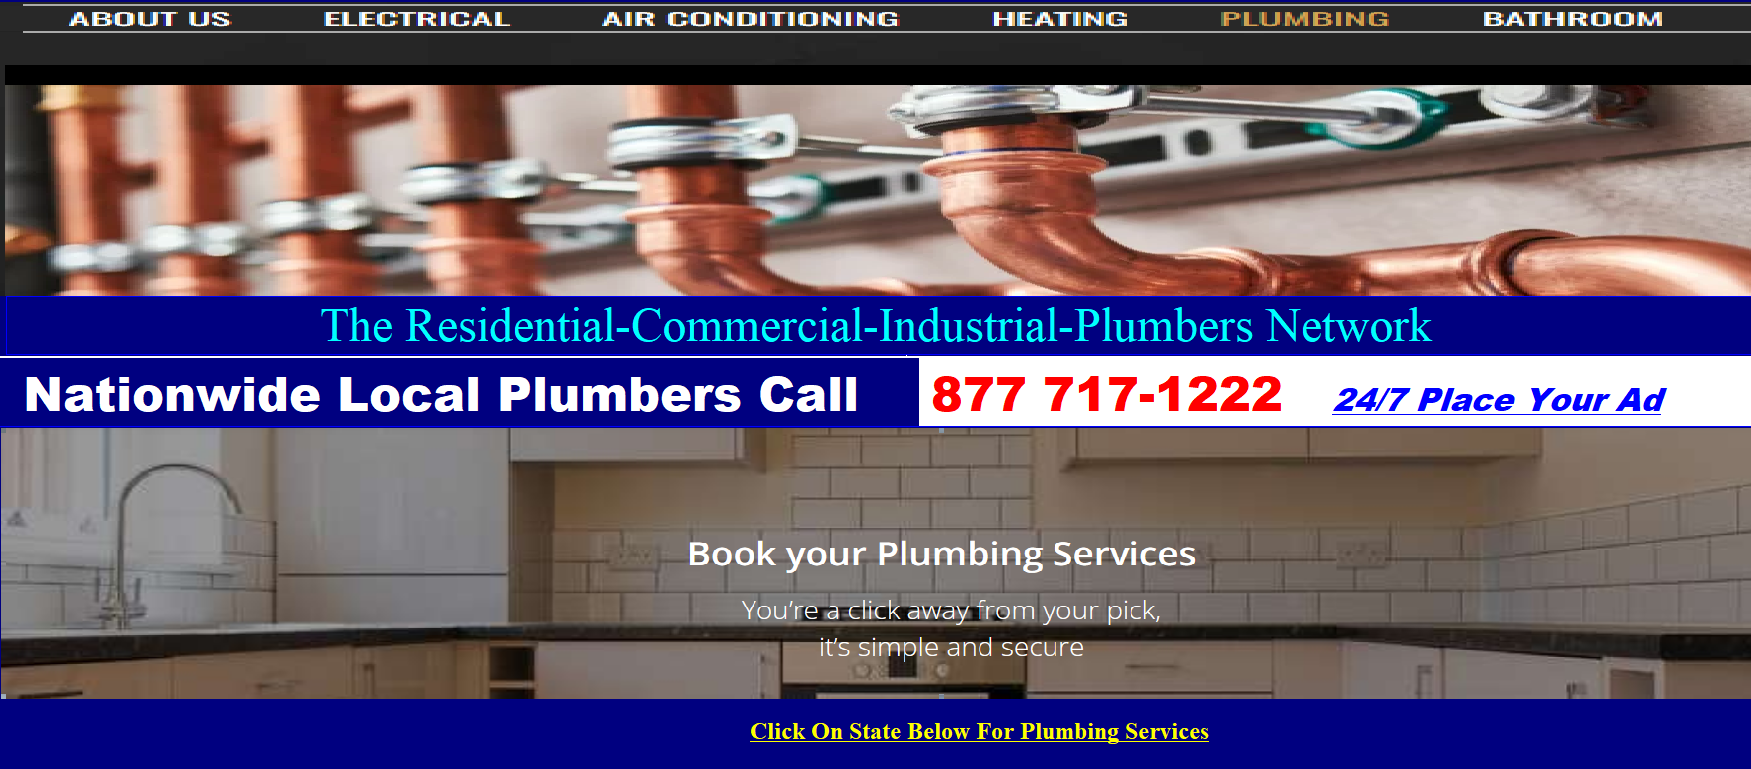 New Hampshire plumber installer license prep class for ios download free